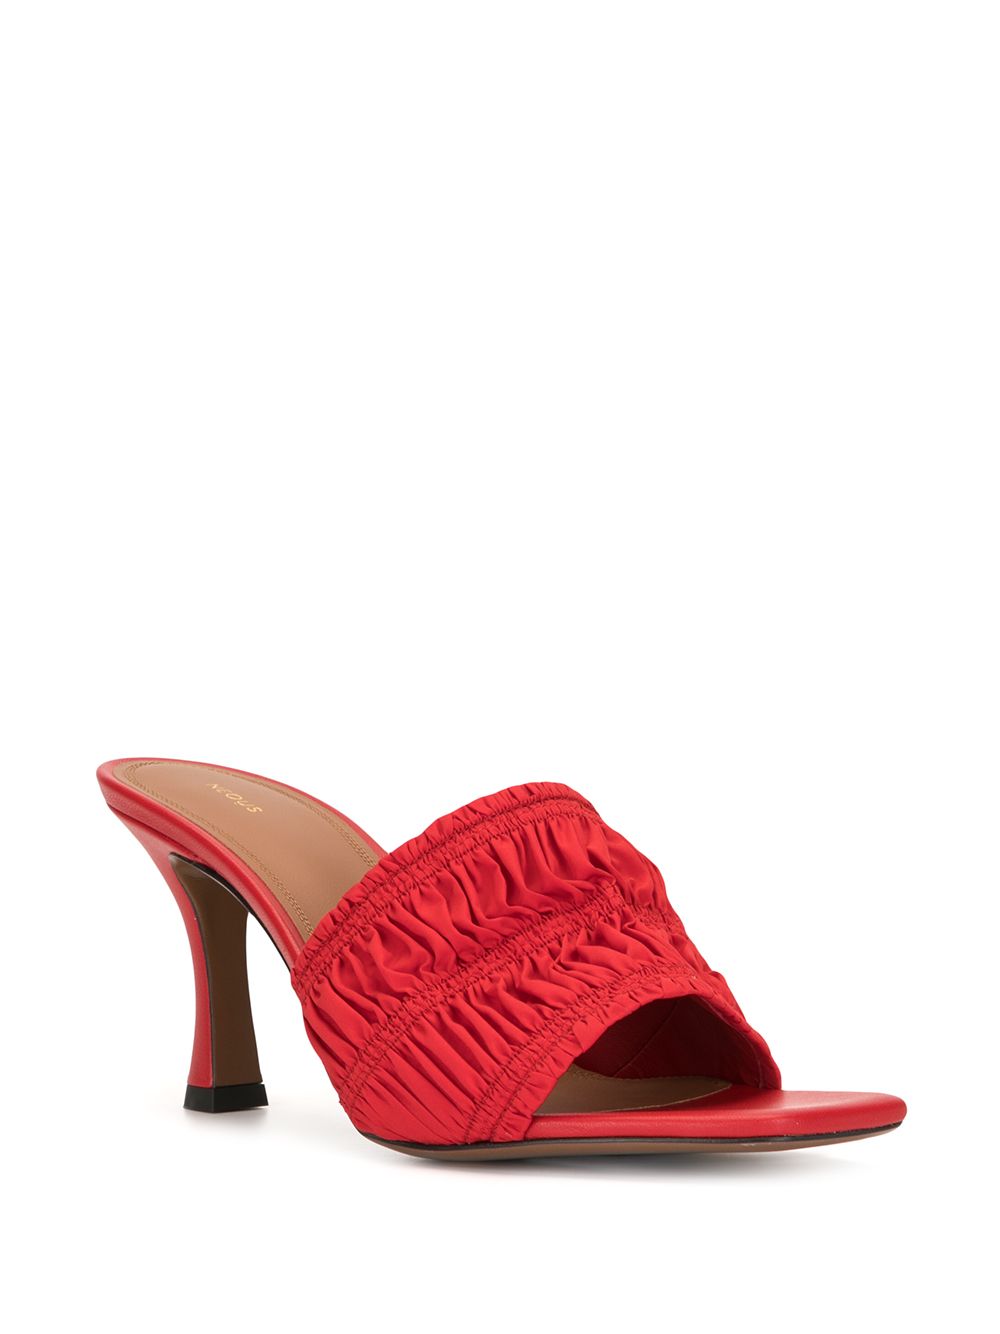 Shop NEOUS ruched detail mules with Express Delivery - FARFETCH